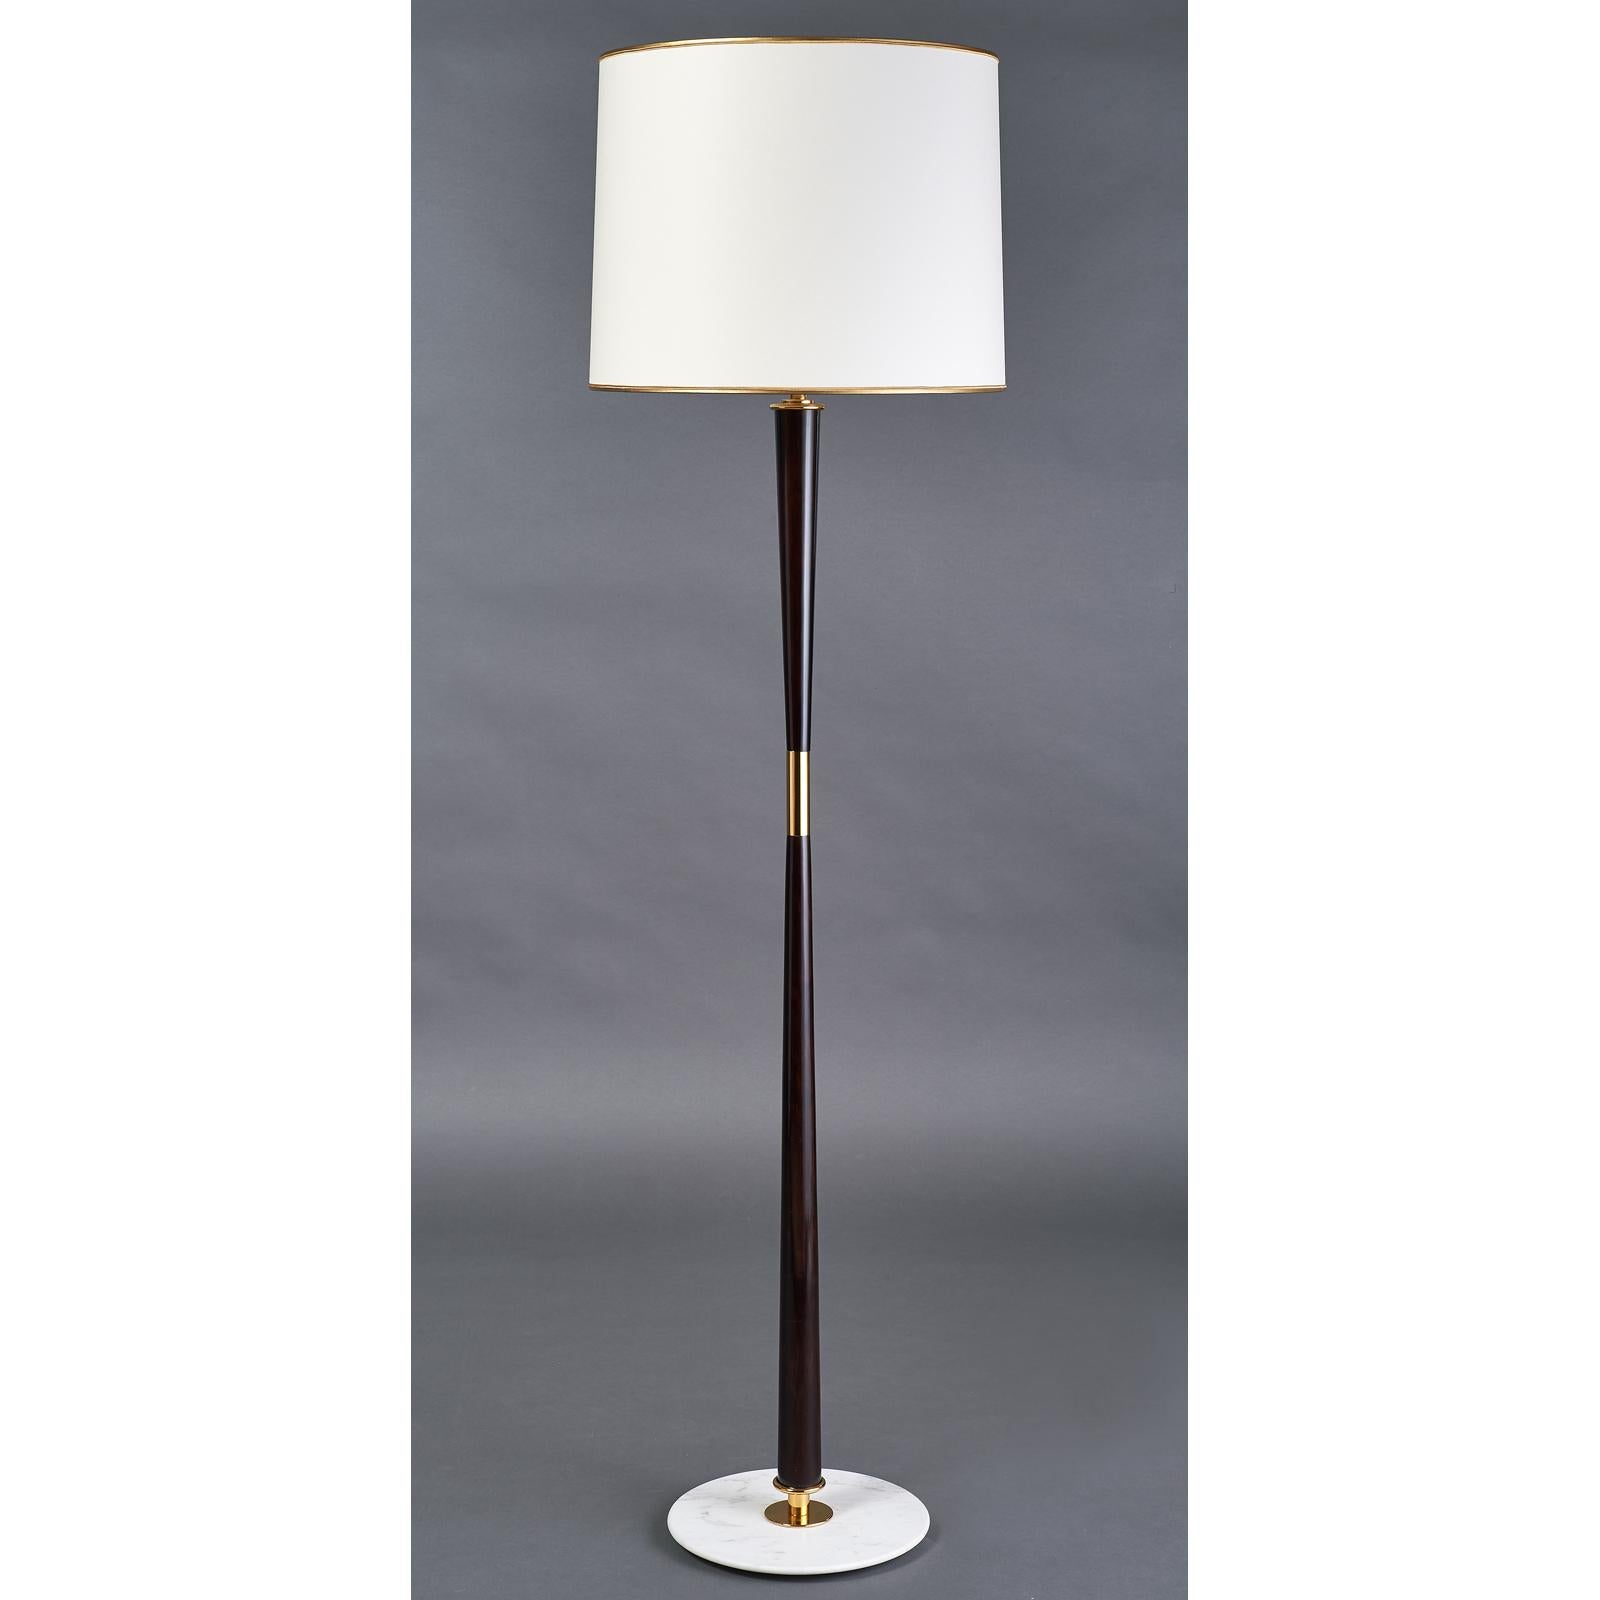 Stilnovo, attributed to
Elegant polished mahogany stained wood floor lamp with polished brass mounts, marble base.
Italy, 1950s
Dimensions: 68 H x 18.5 Diameter
Rewired for use in the US with 3 standard base bulbs.
       